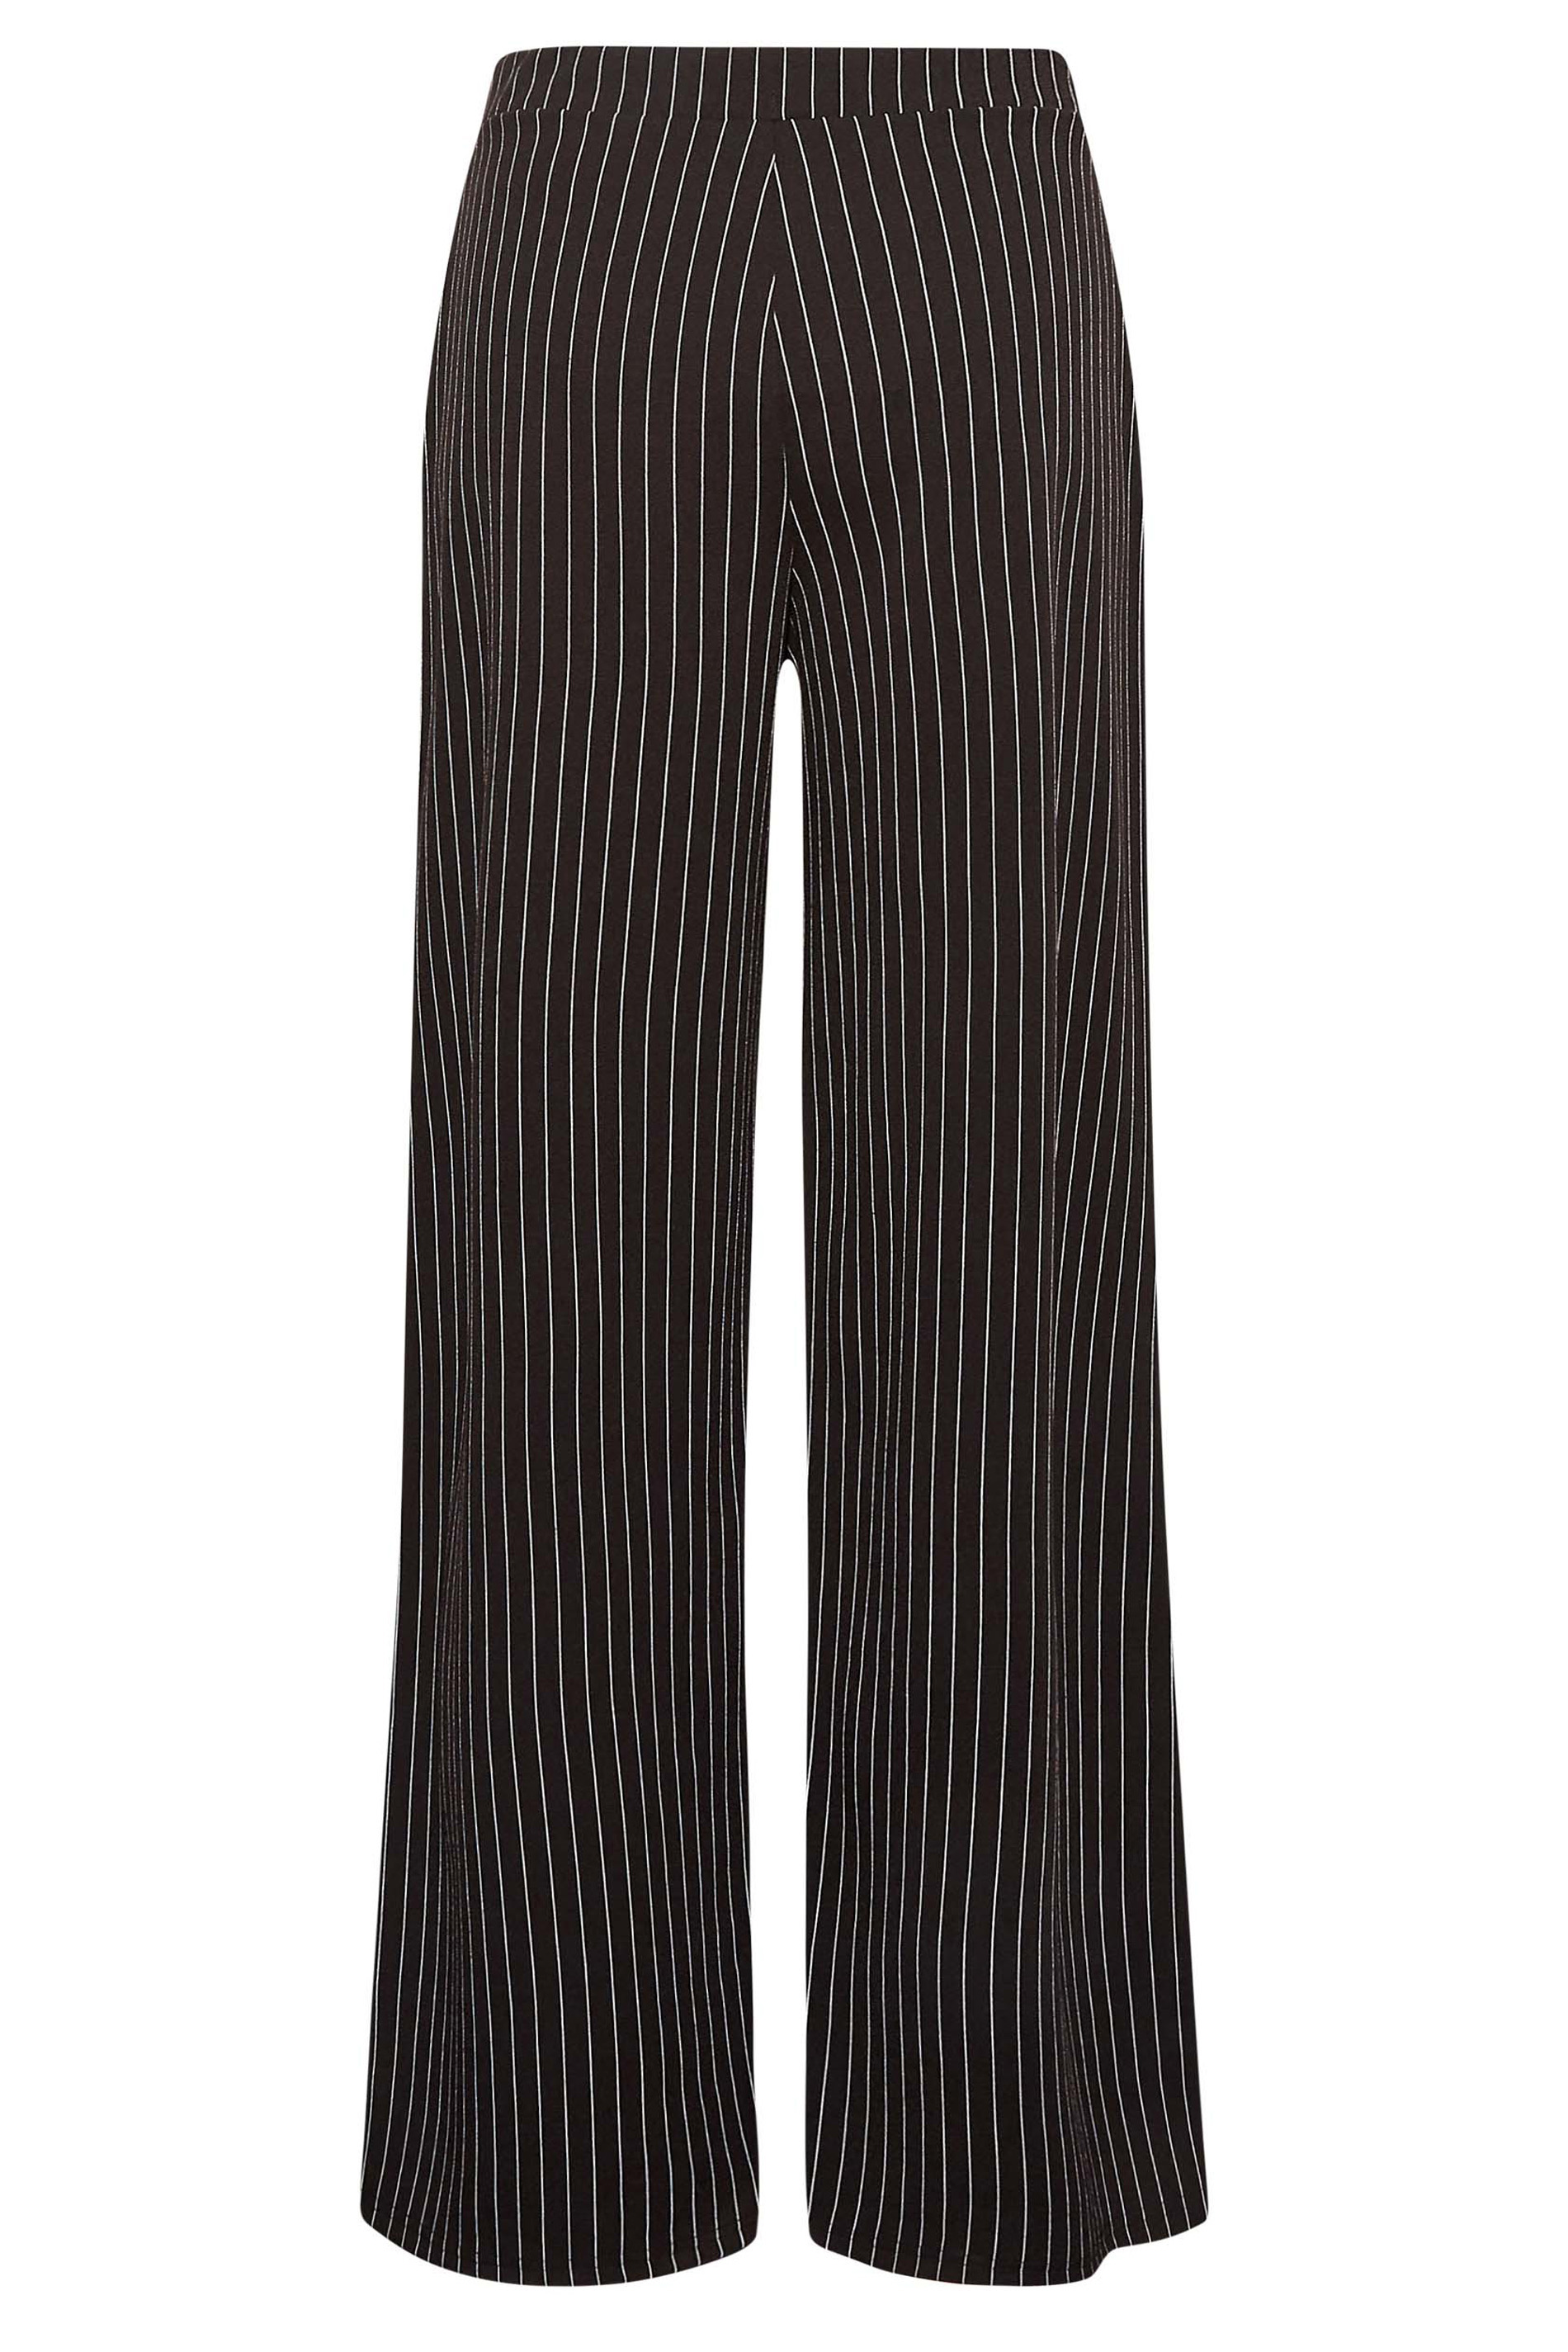 YOURS PETITE Plus Size Black Pinstripe Wide Leg Trousers | Yours Clothing